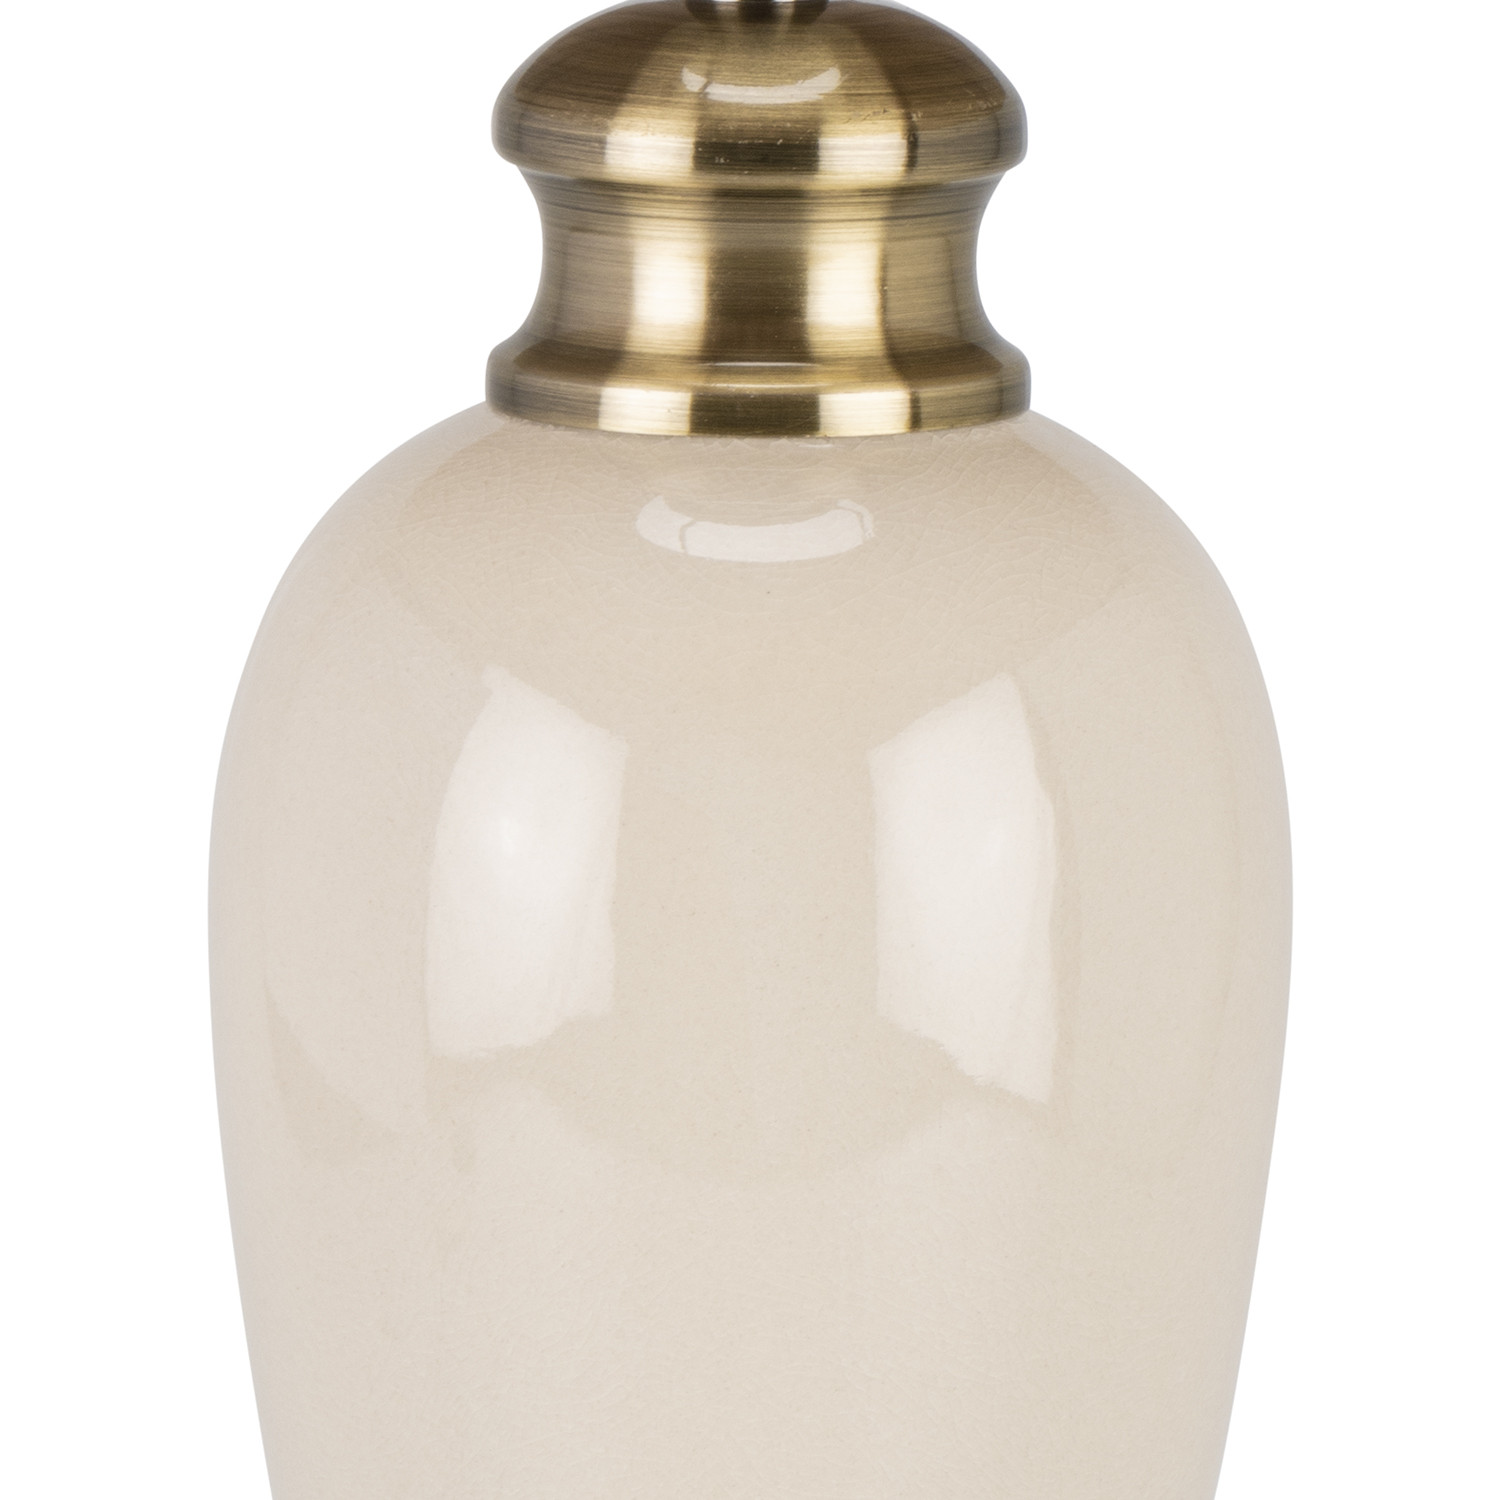 Ivory Ceramic and Brass Vintage Lamp with Pleated Shade Image 2